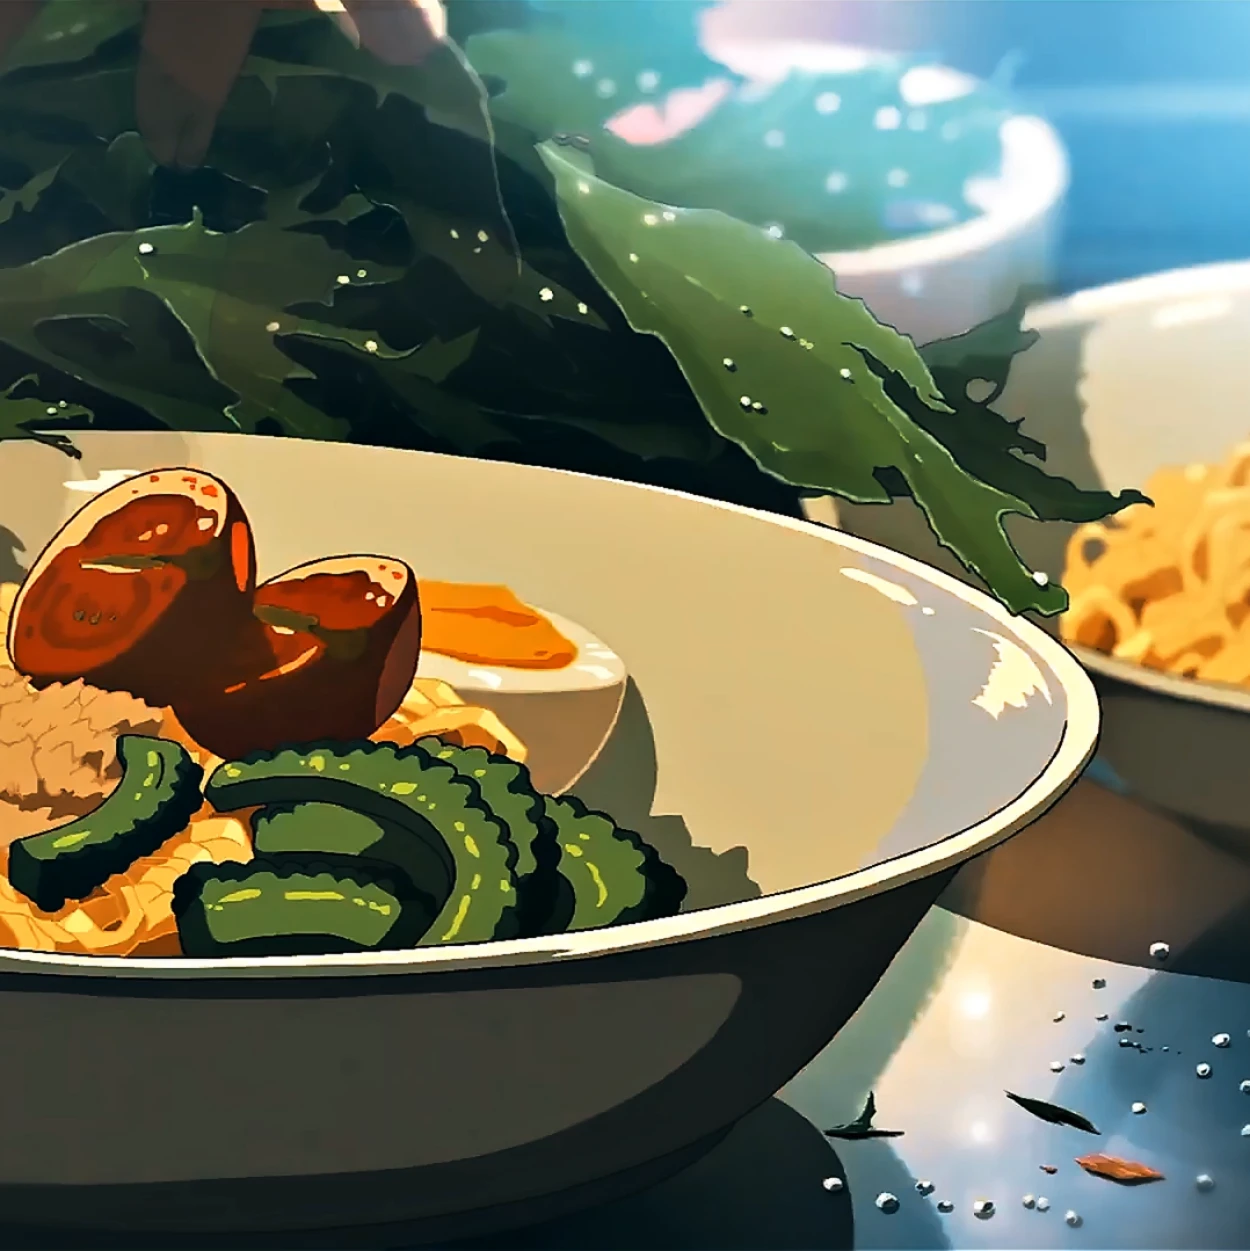 Food in Anime looks extra delicious